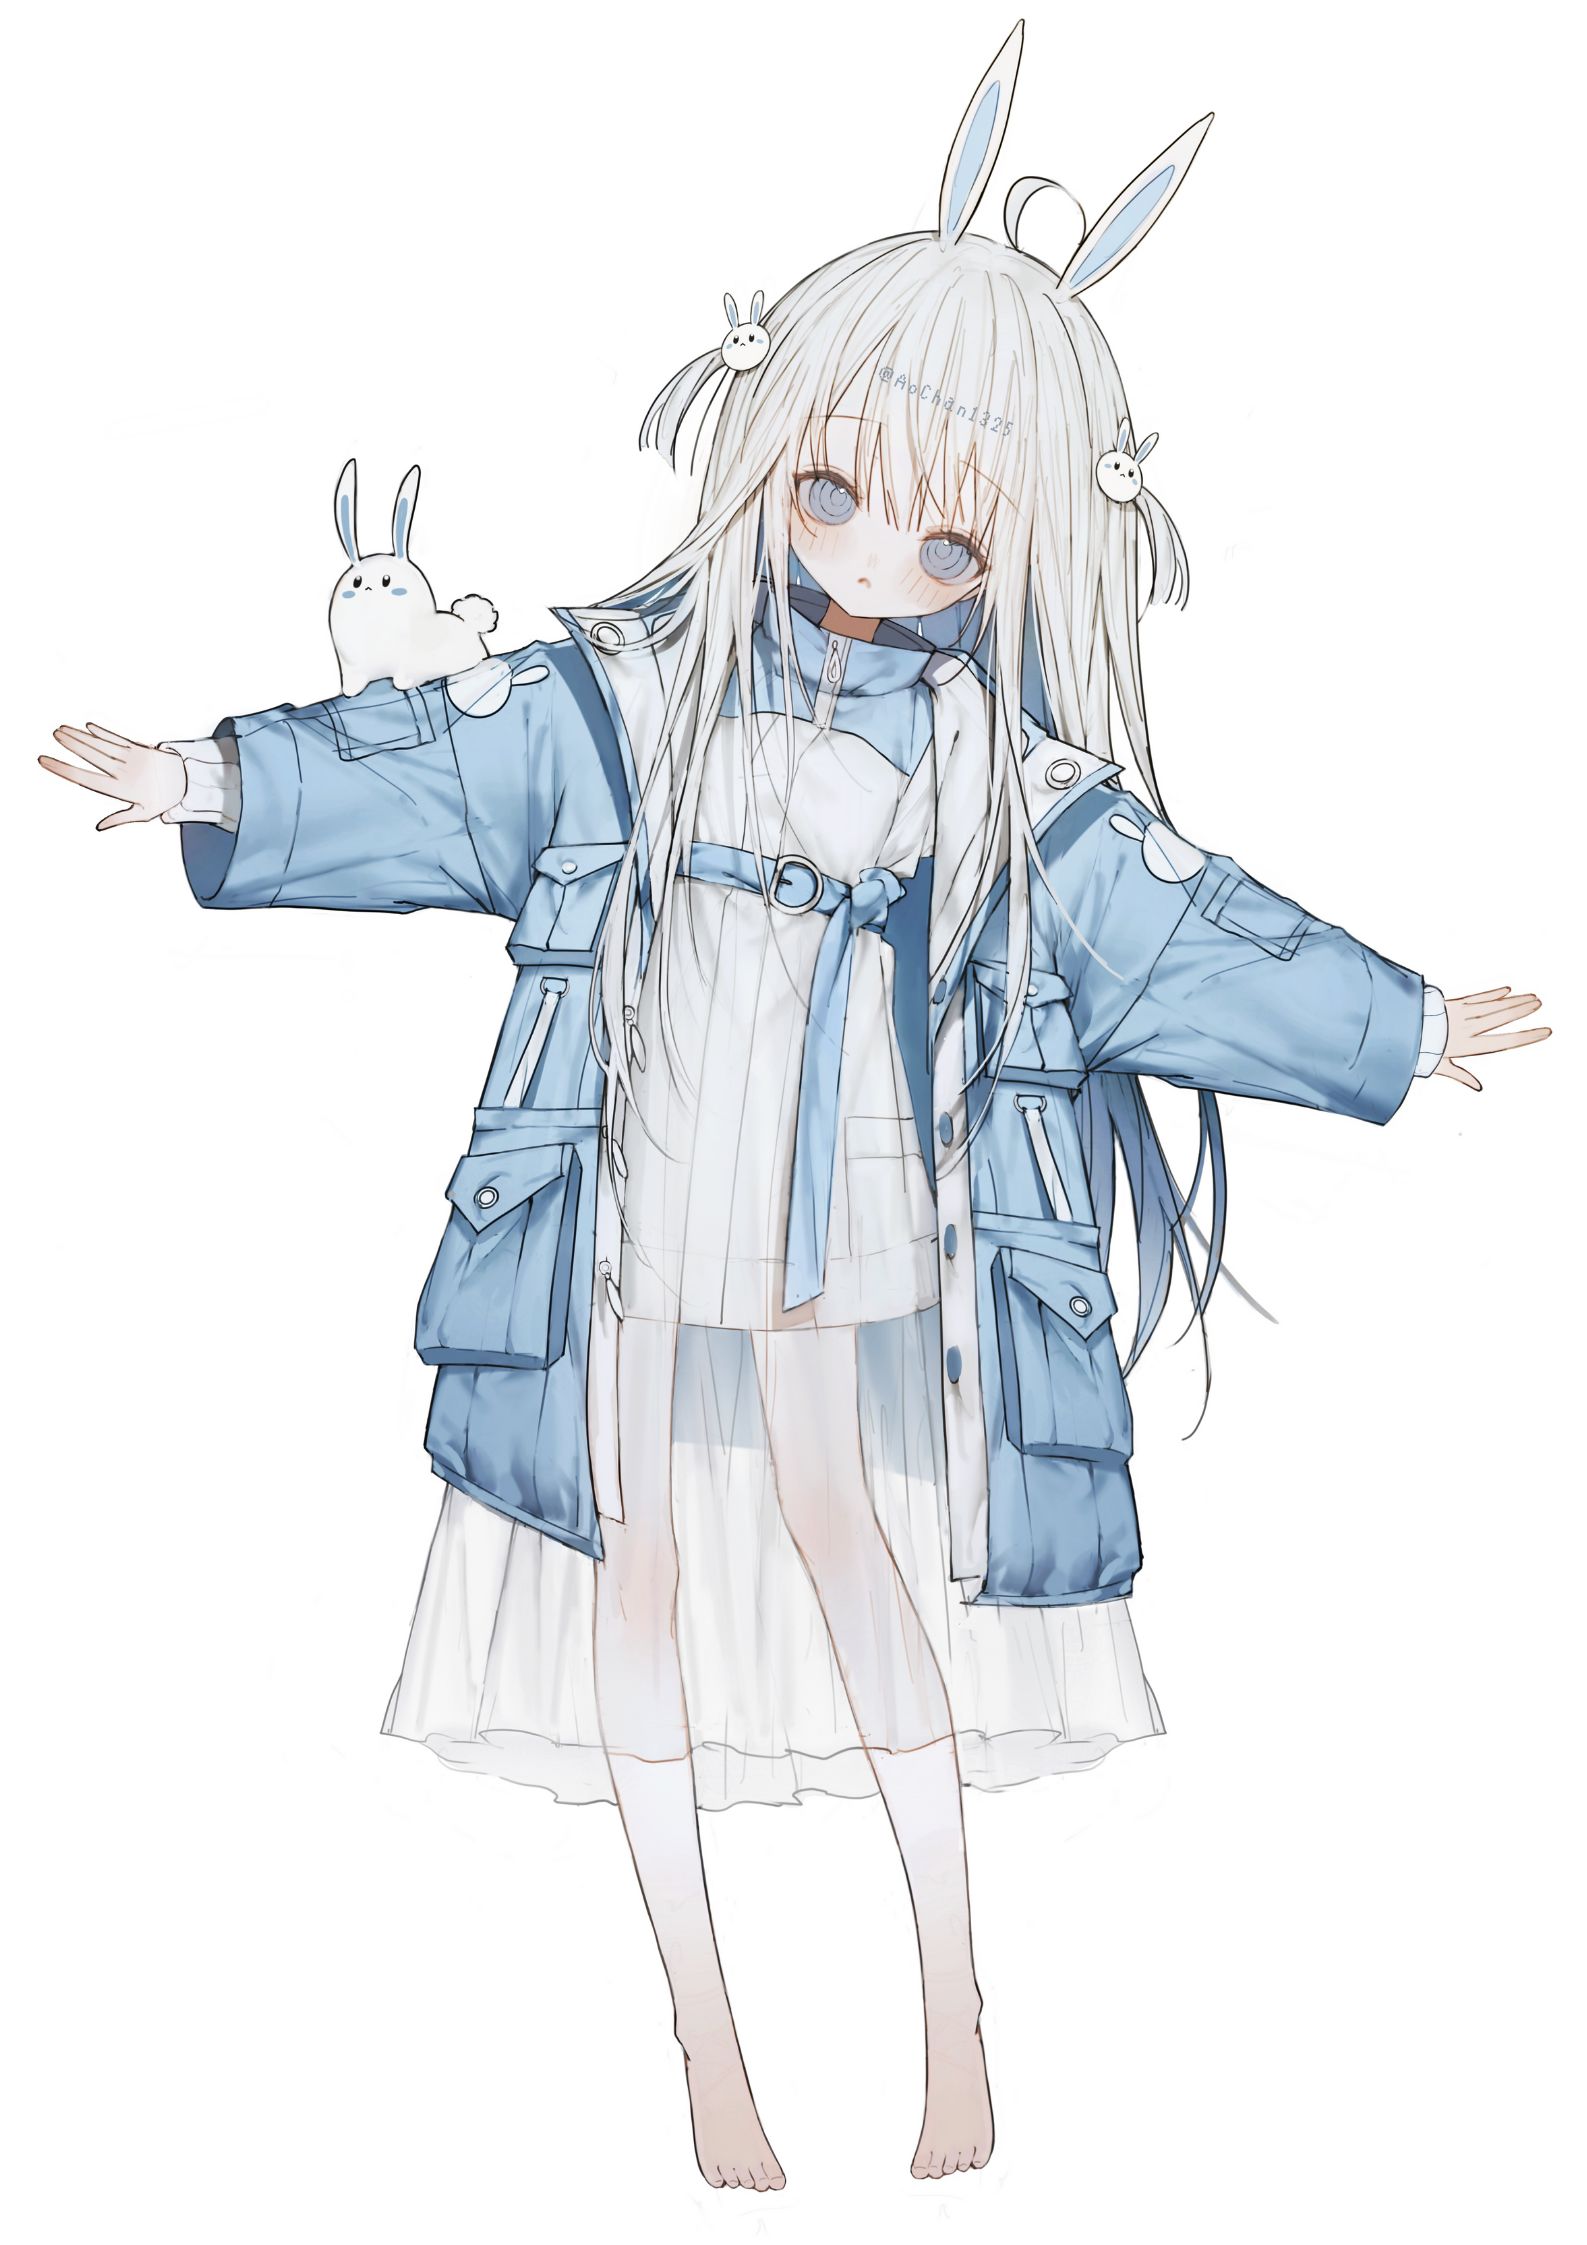 My oc in new outfit插画图片壁纸